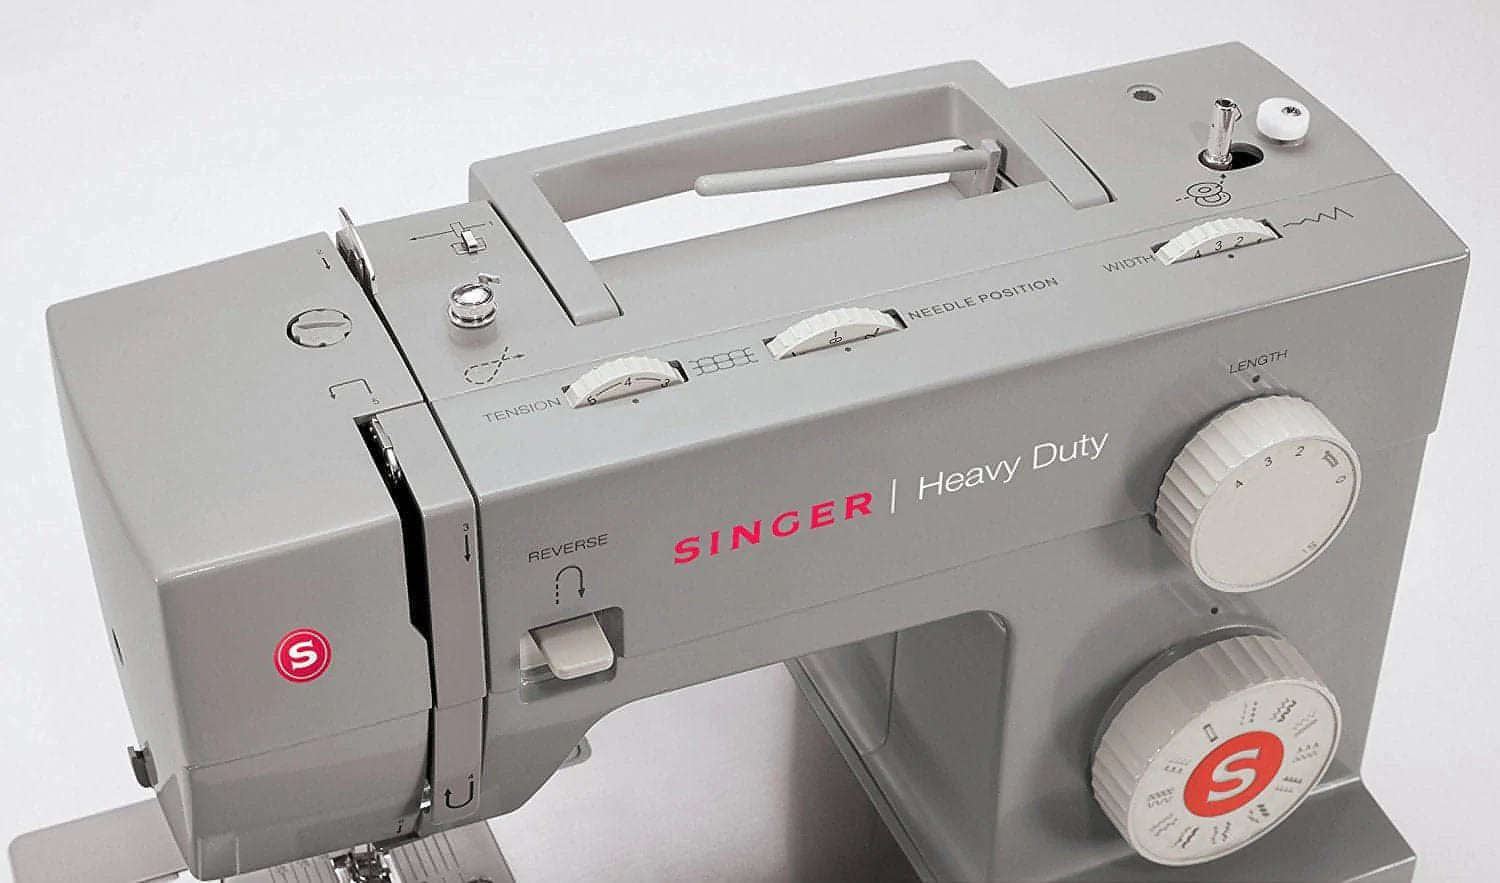 SINGER | 4423 Heavy Duty Sewing Machine With Included Accessory Kit, 97  Stitch Applications, Simple, Easy To Use & Great for Beginners